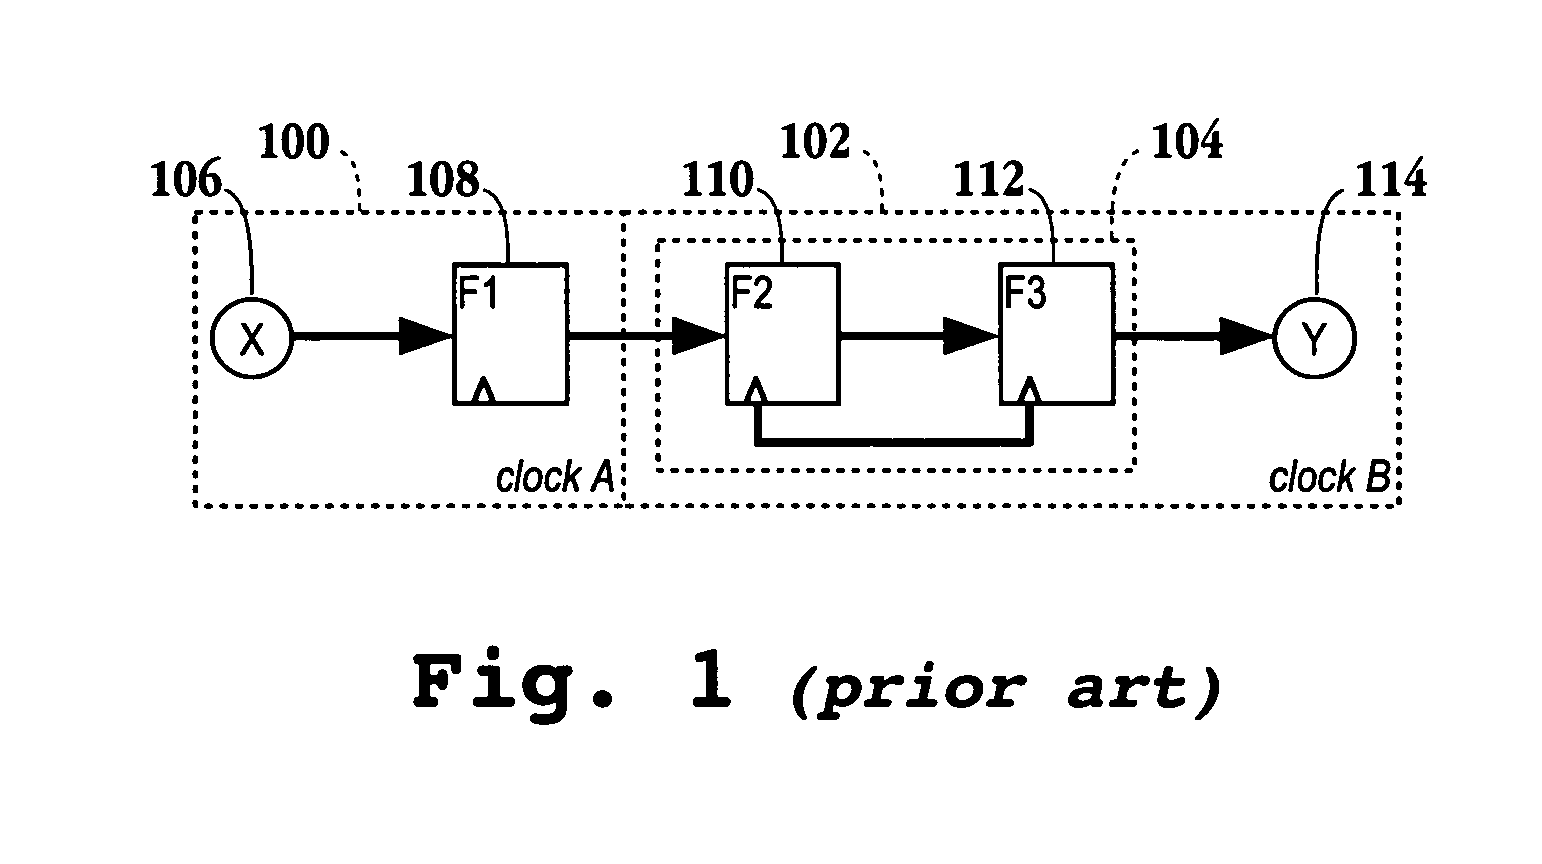 Method for generating a synchronization signal based on the clock ratio between two clock domains for data transfer between the domains